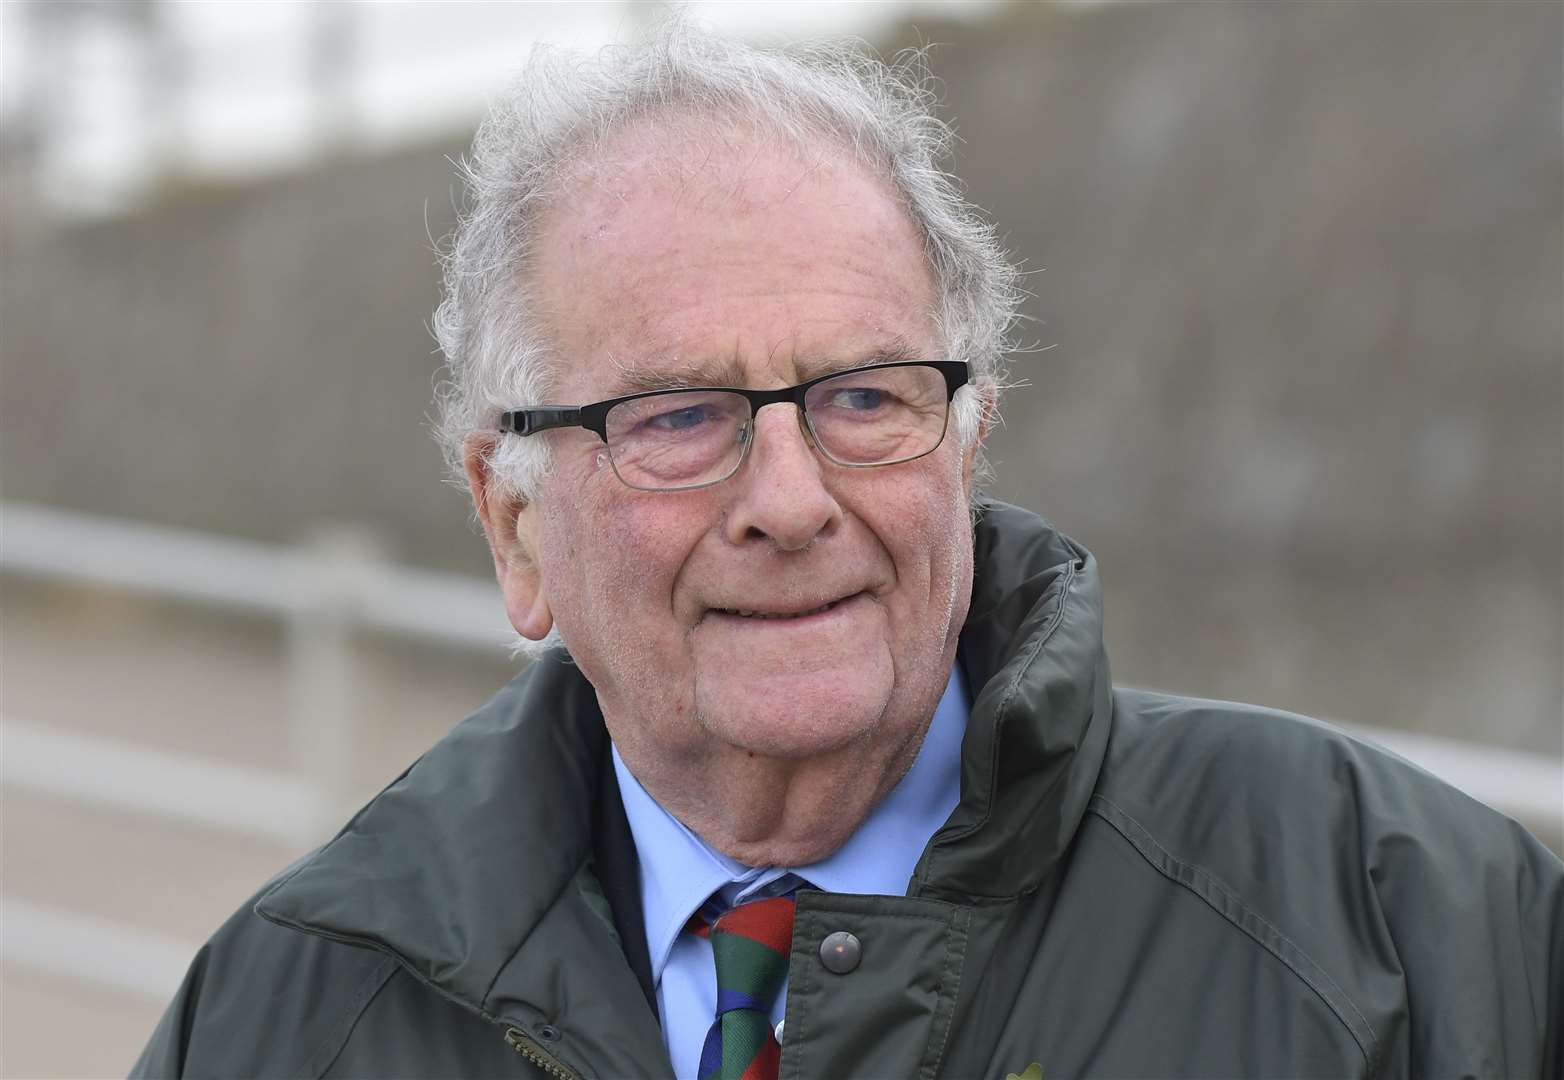 North Thanet MP Sir Roger Gale said the delay was "frustrating"